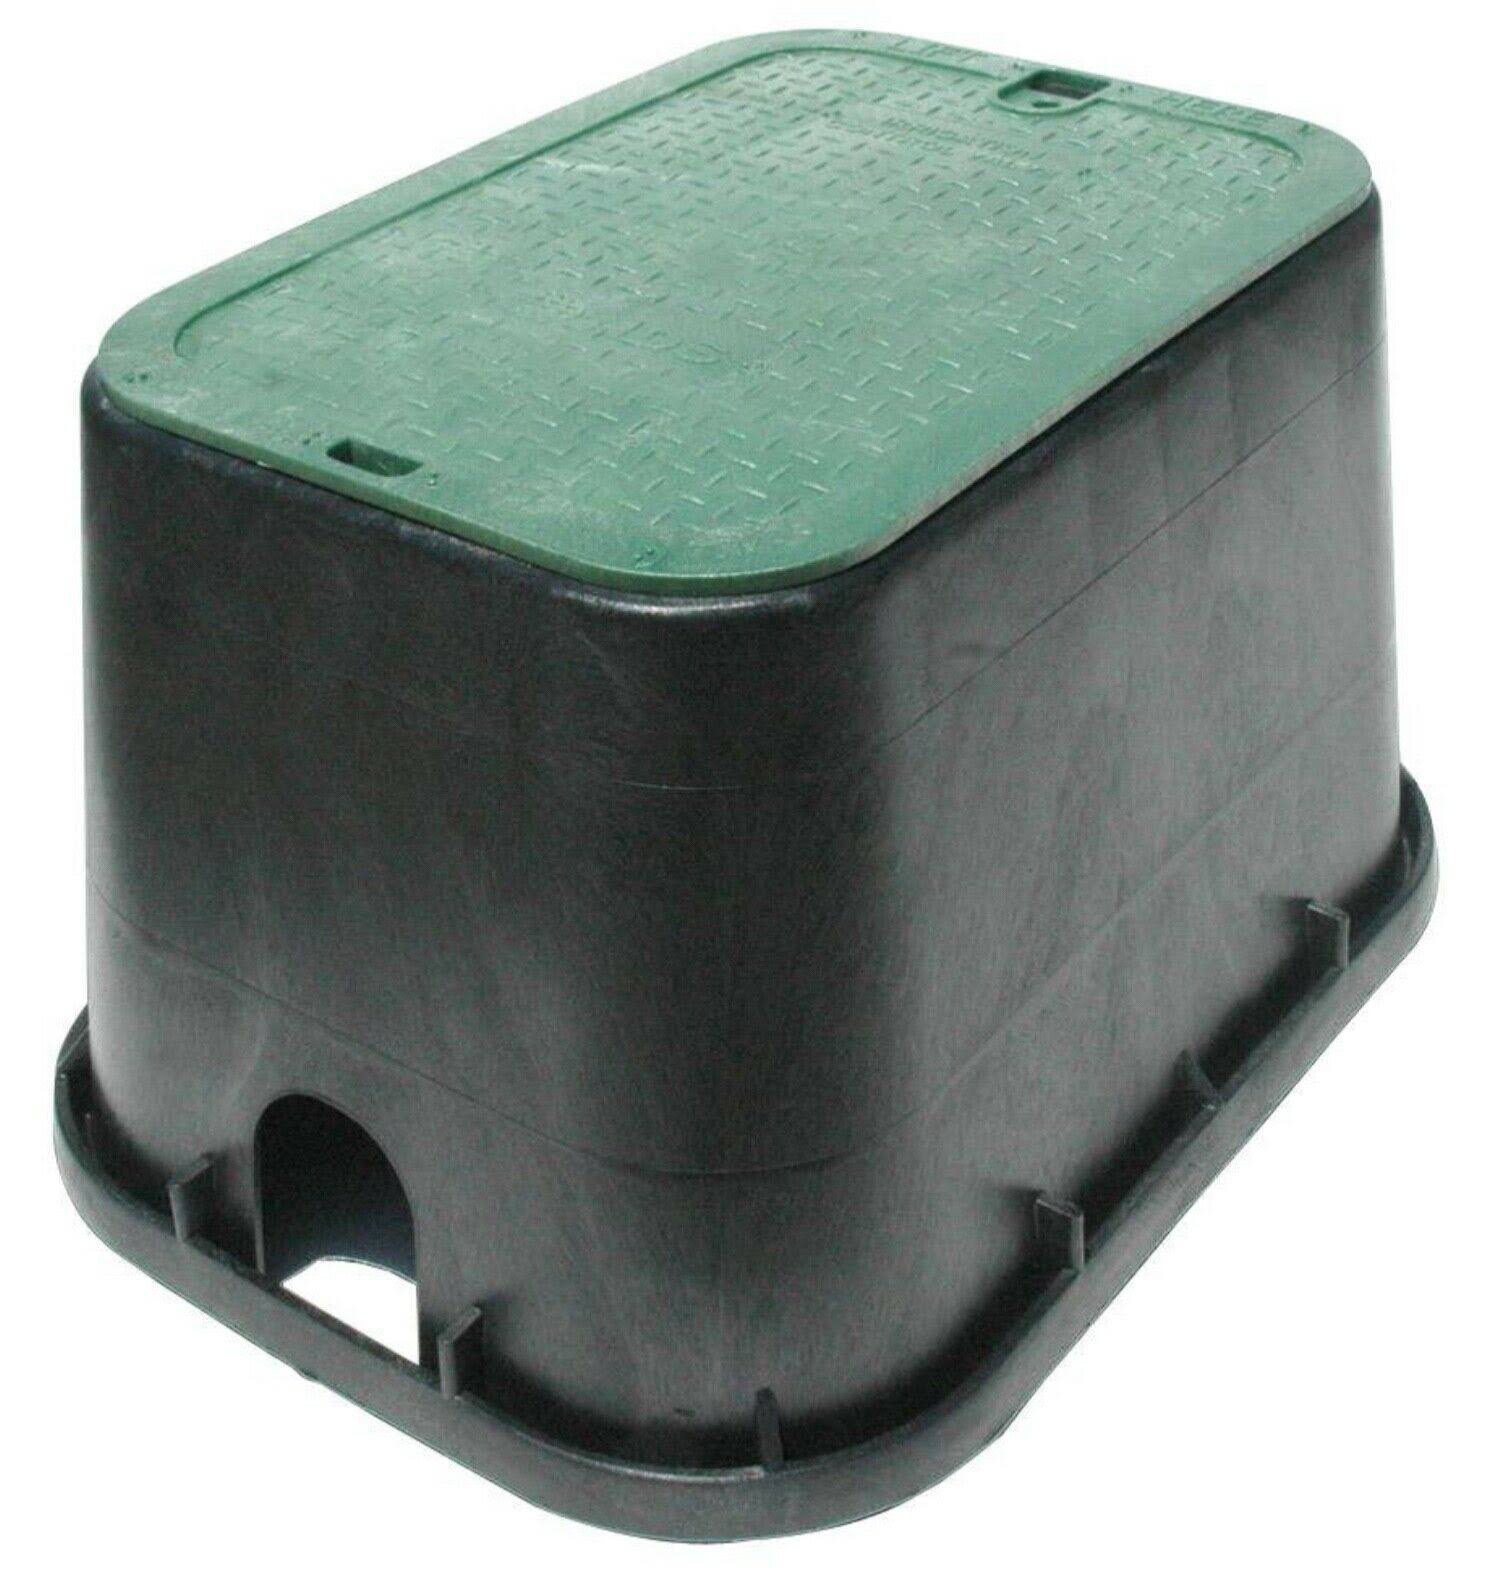 NDS 113BC Standard Series Valve Box Cover - 14x19 in